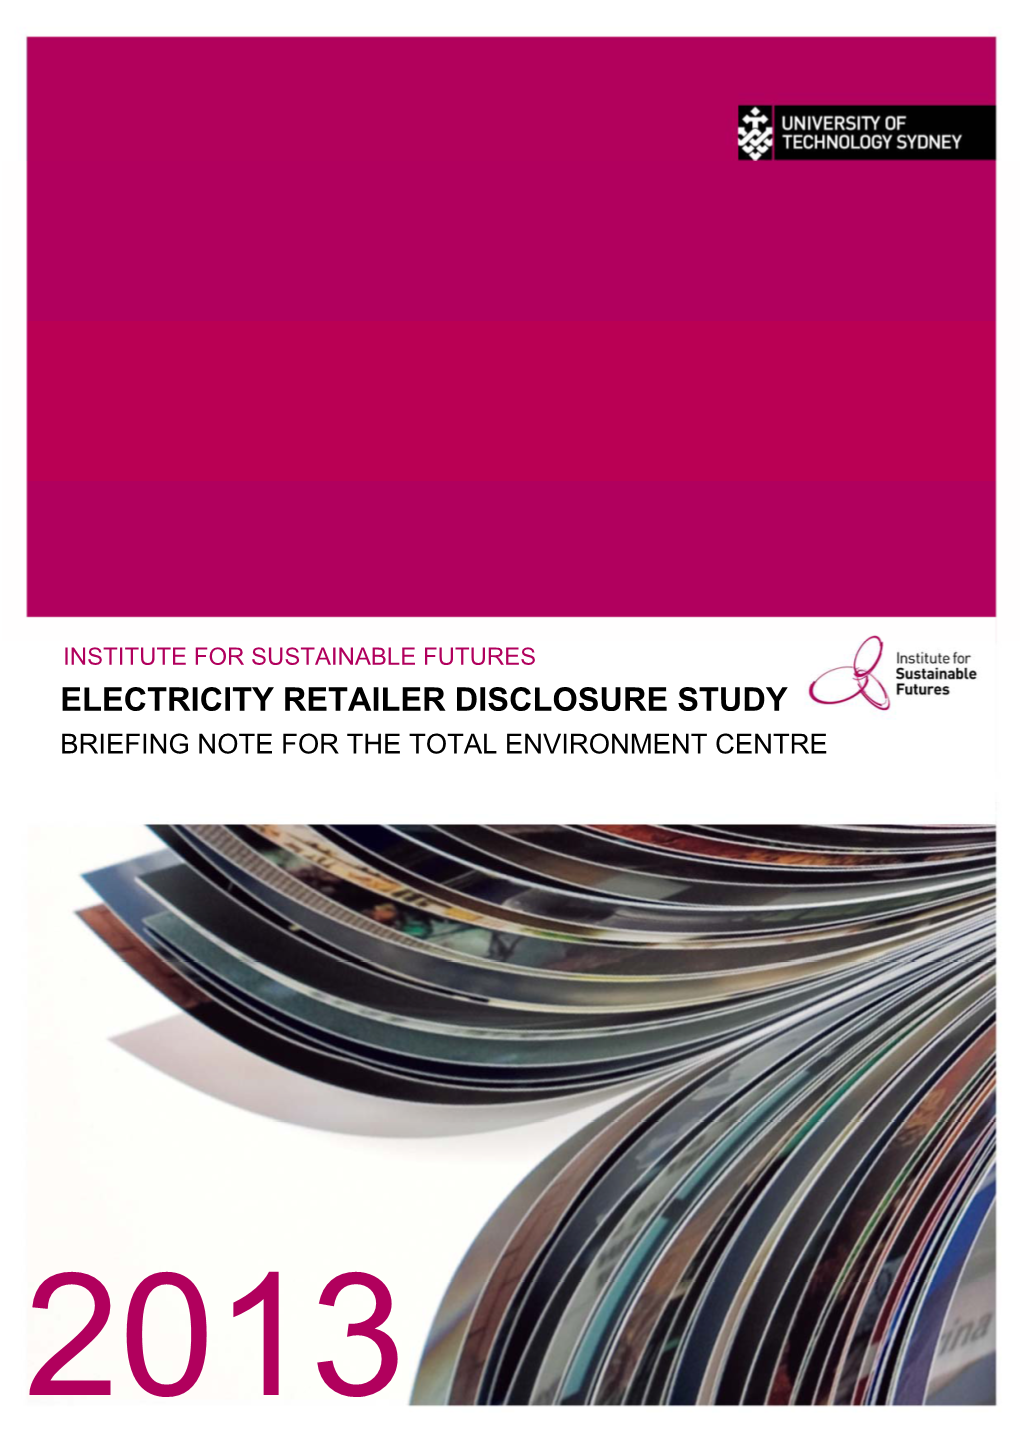 Electricity Retailer Disclosure Study Briefing Note for the Total Environment Centre